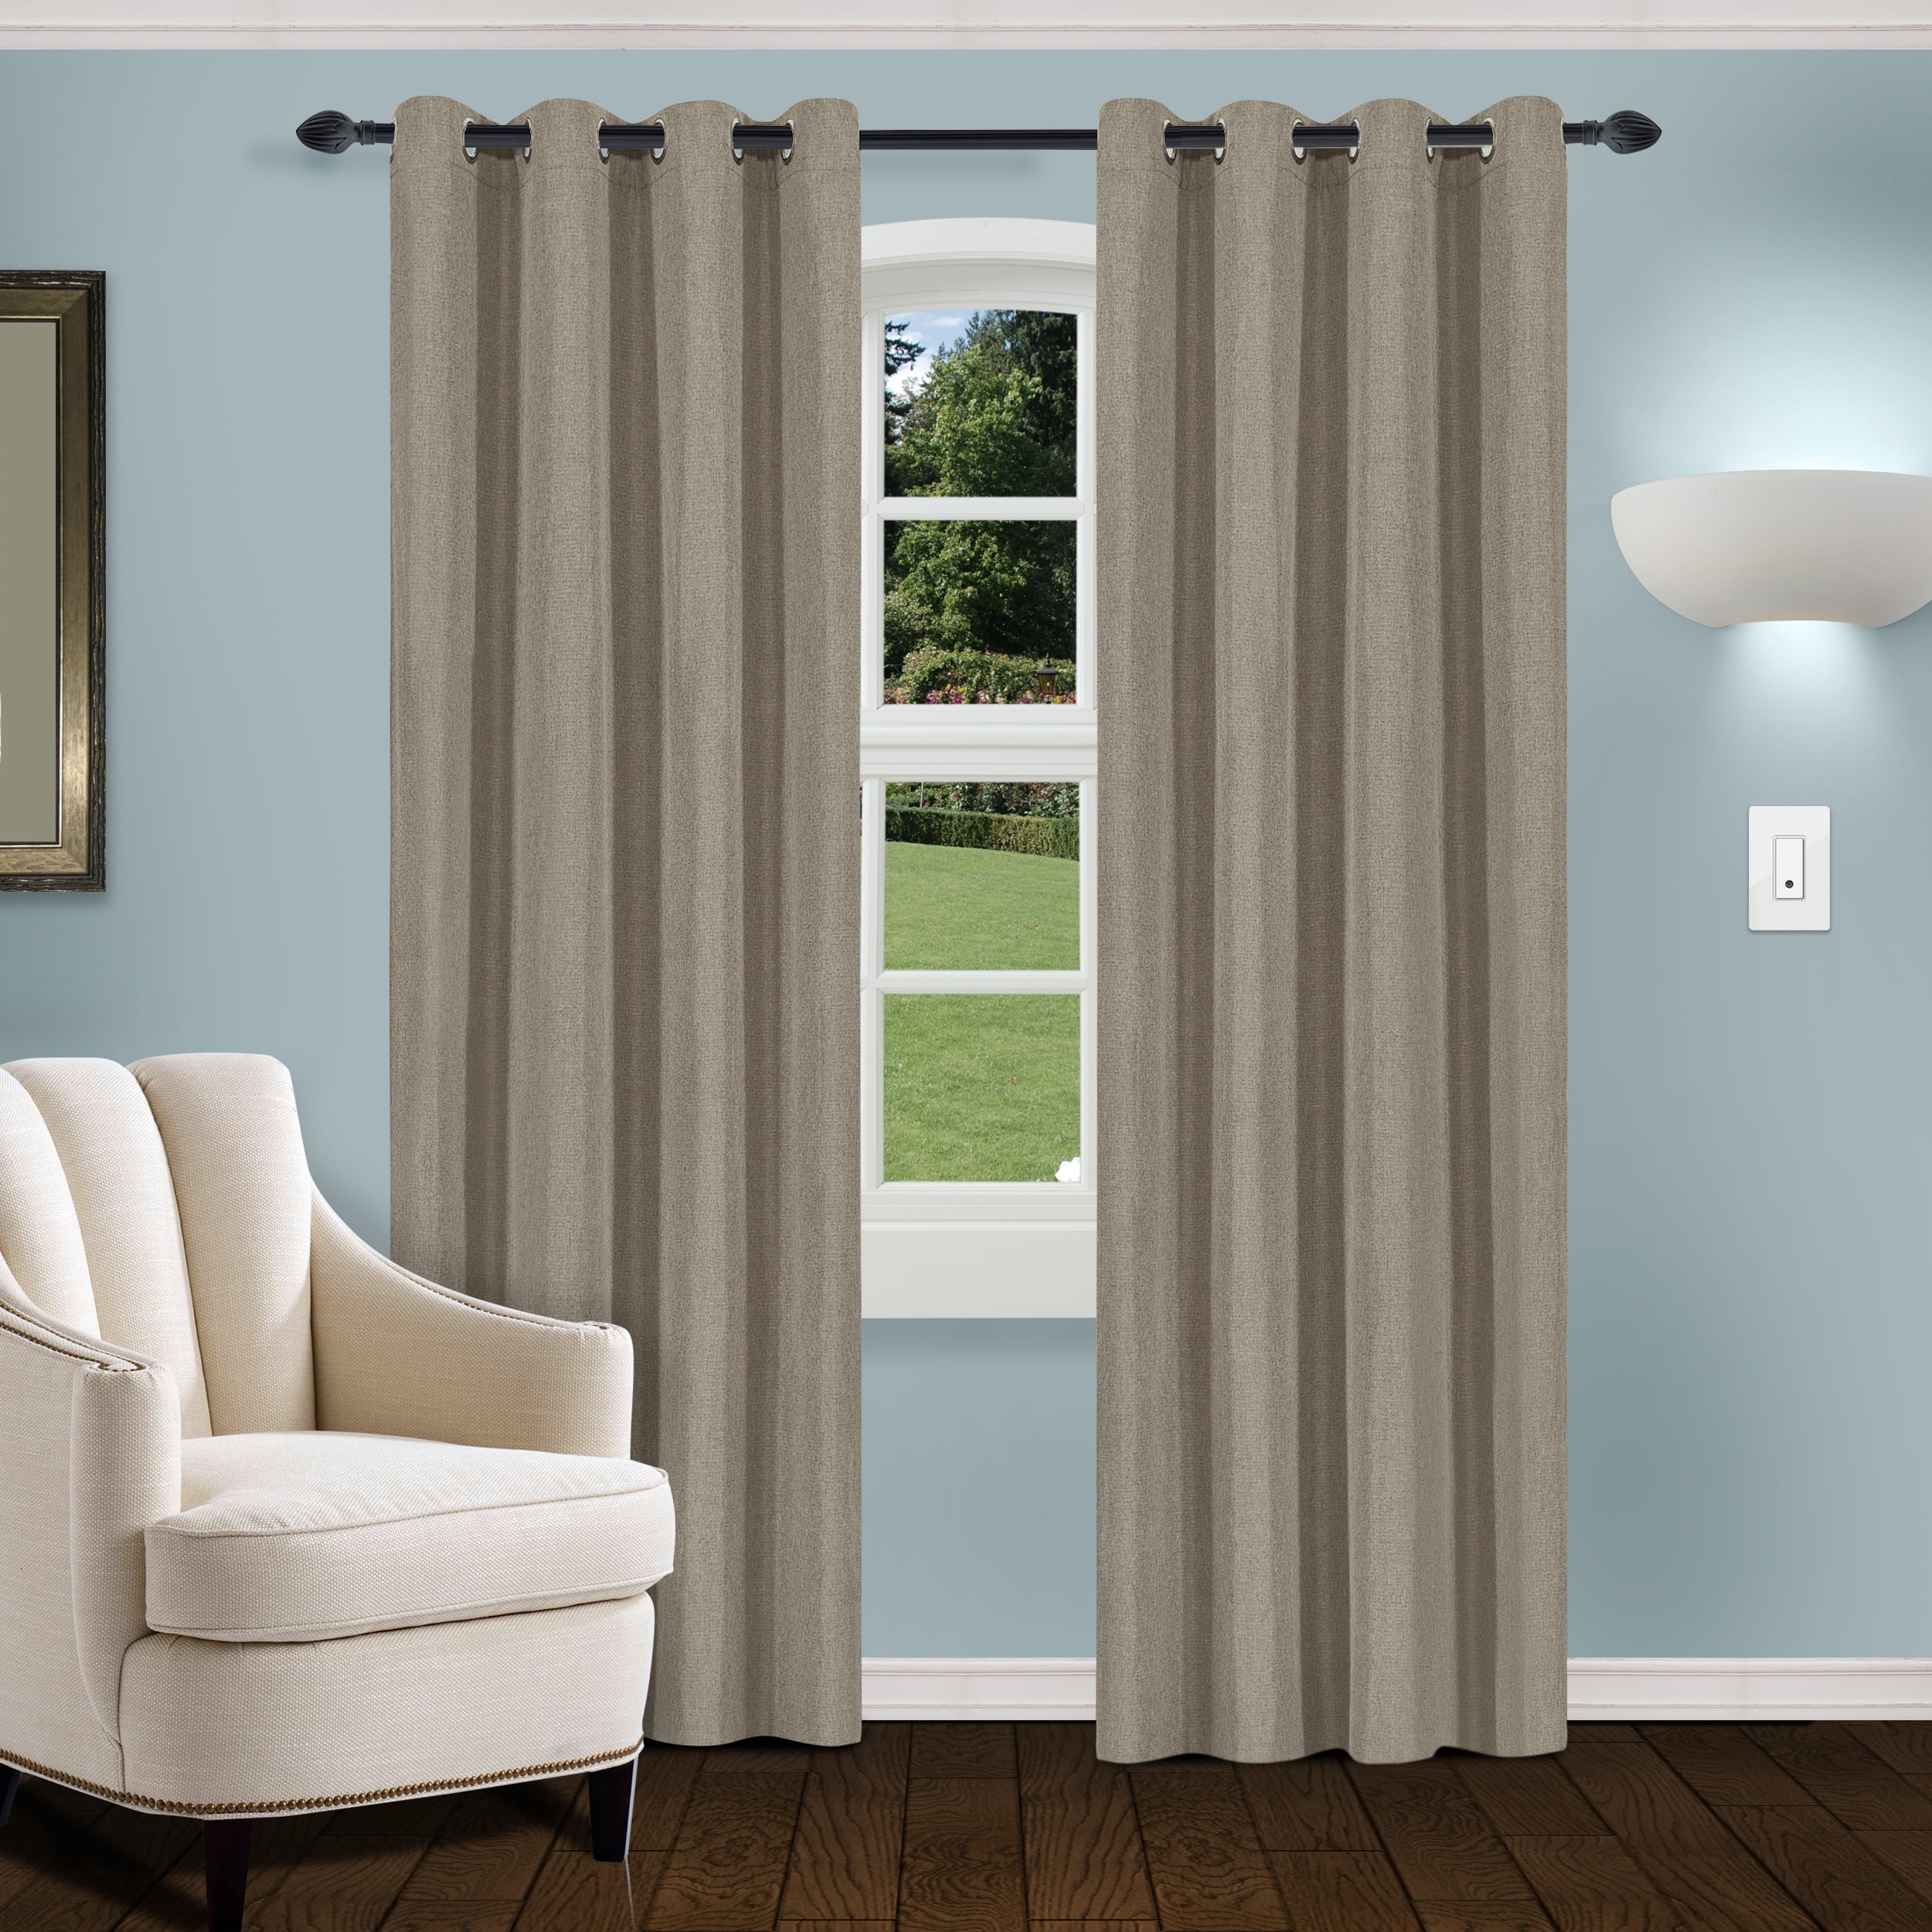 Details about   Dallas Cowboys Blackout Curtain Panel Thermal Insulated Window Drapes 2 Panel 